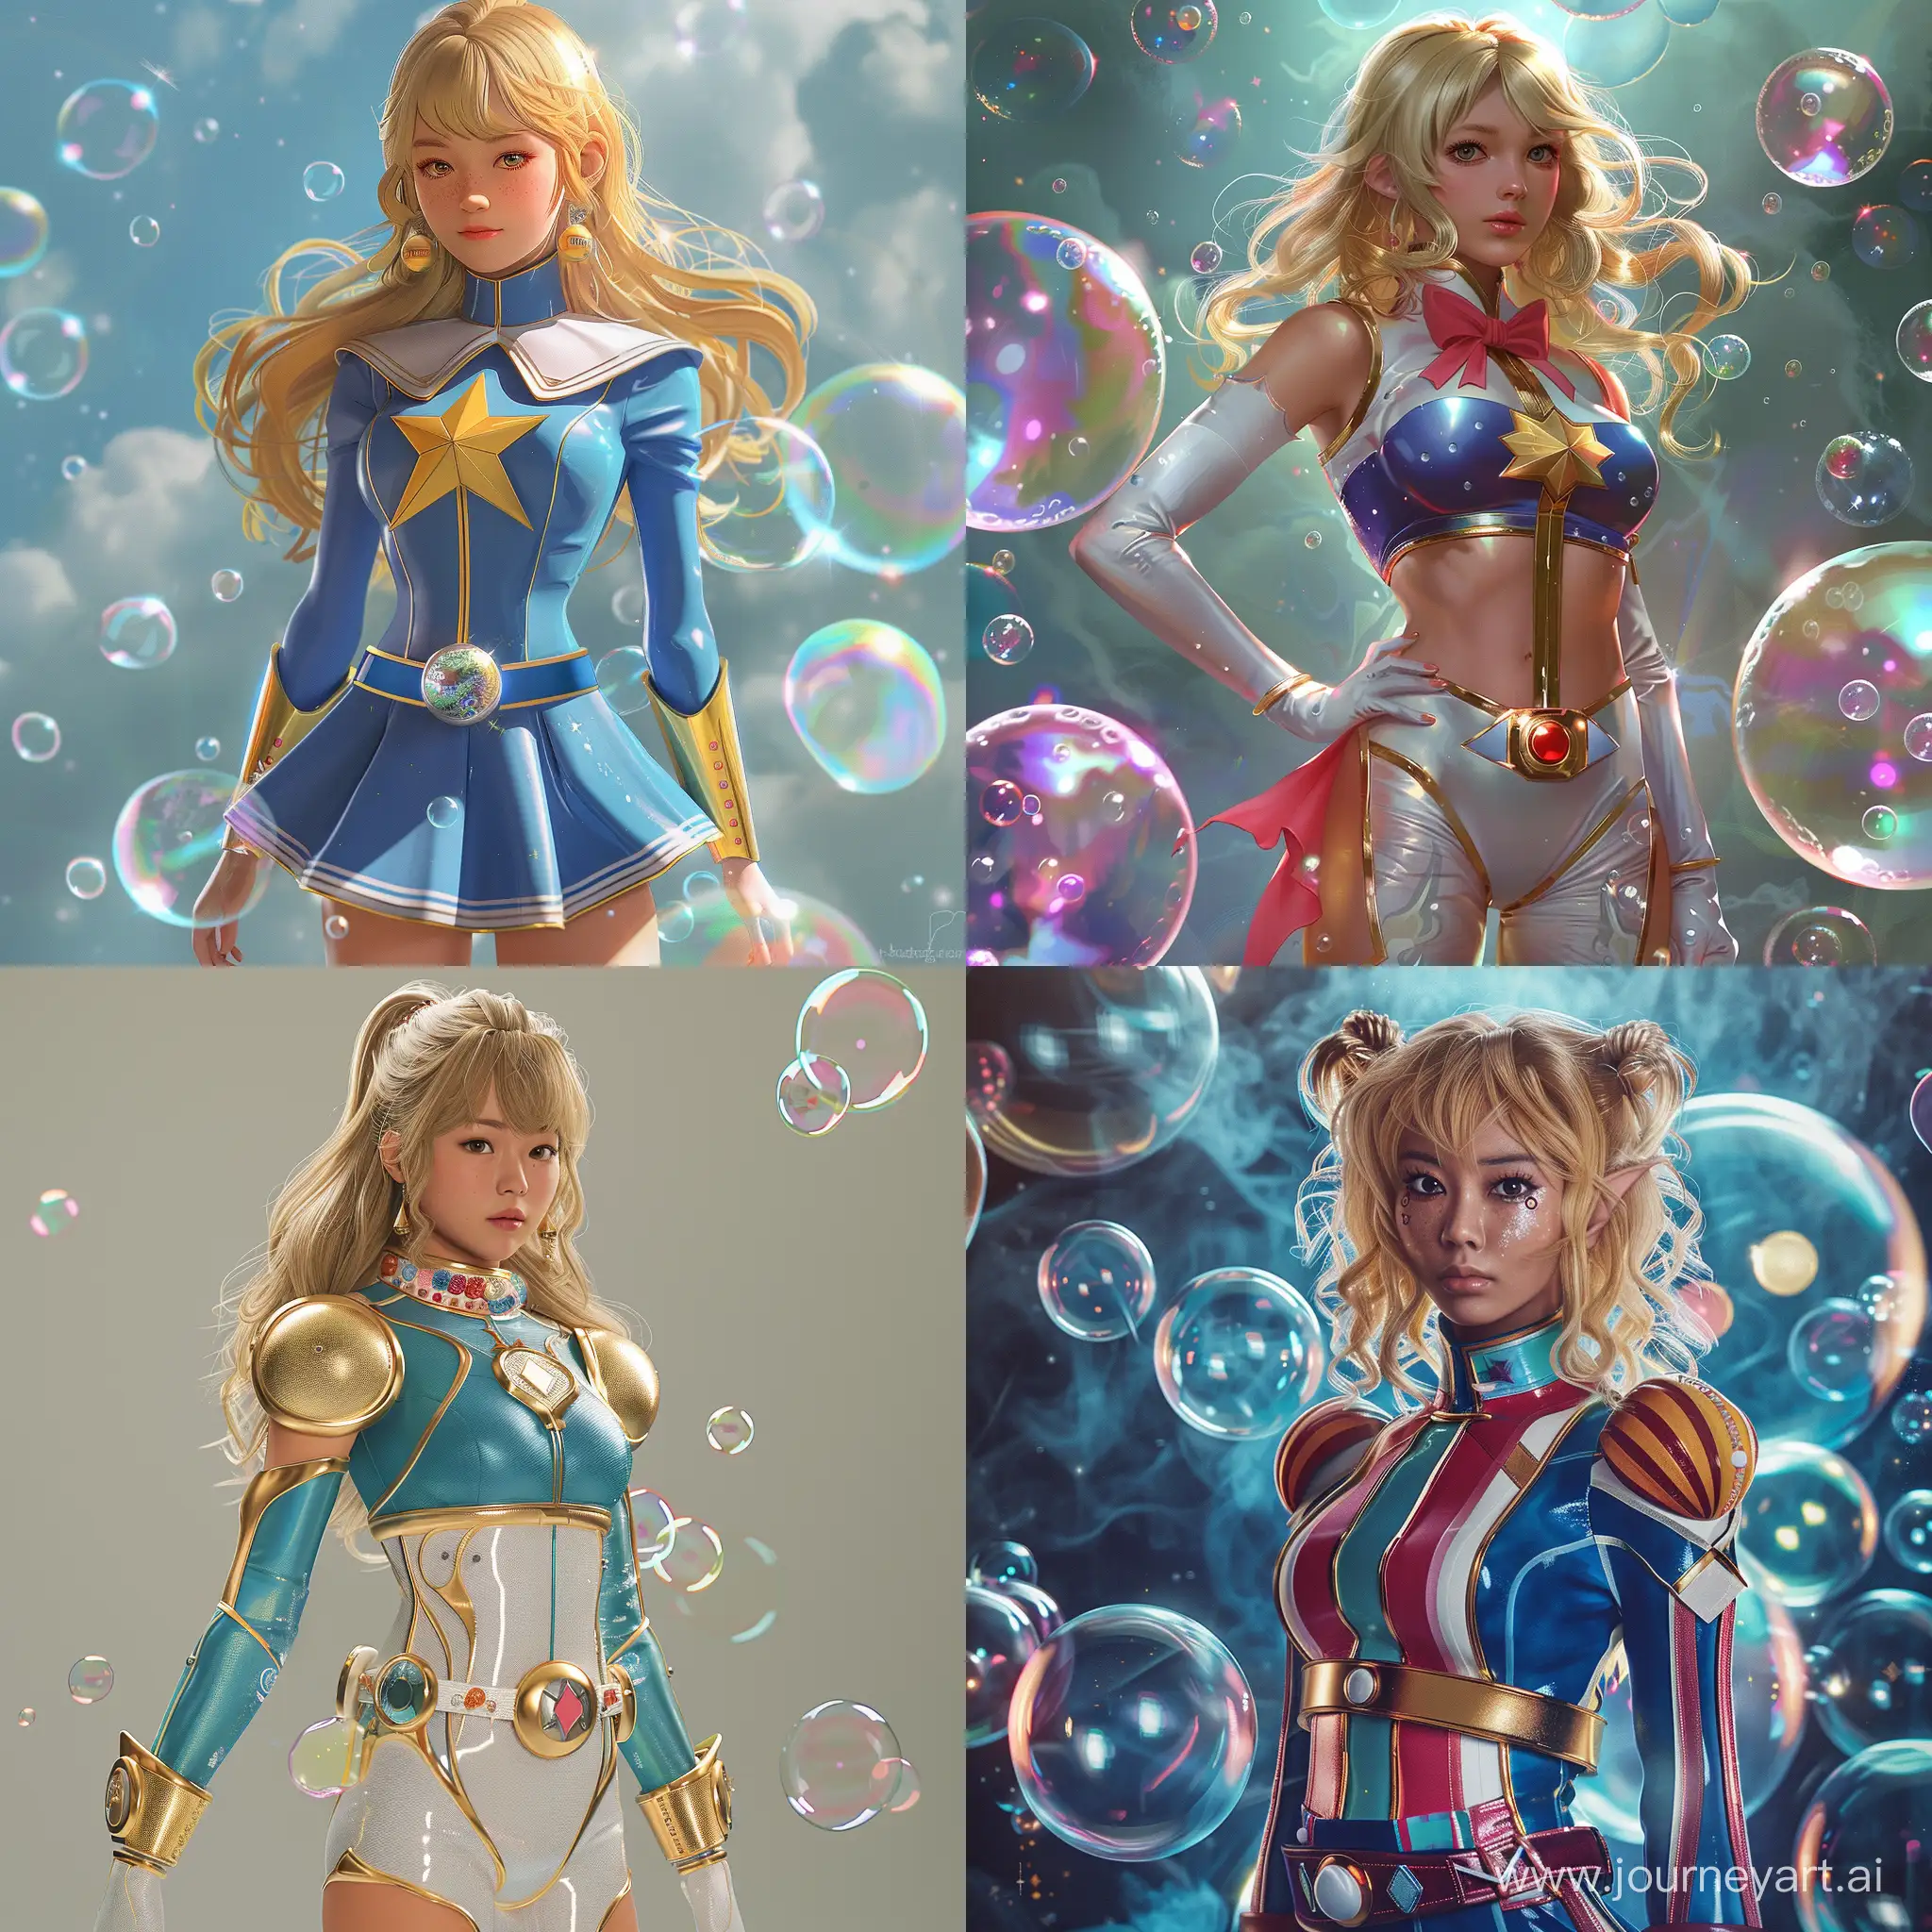 A Superhero girl themed around bubbles with inspiration from Super Sentai and Magical girl uniforms. Photo-realistic. Tanned skin and blonde hair.